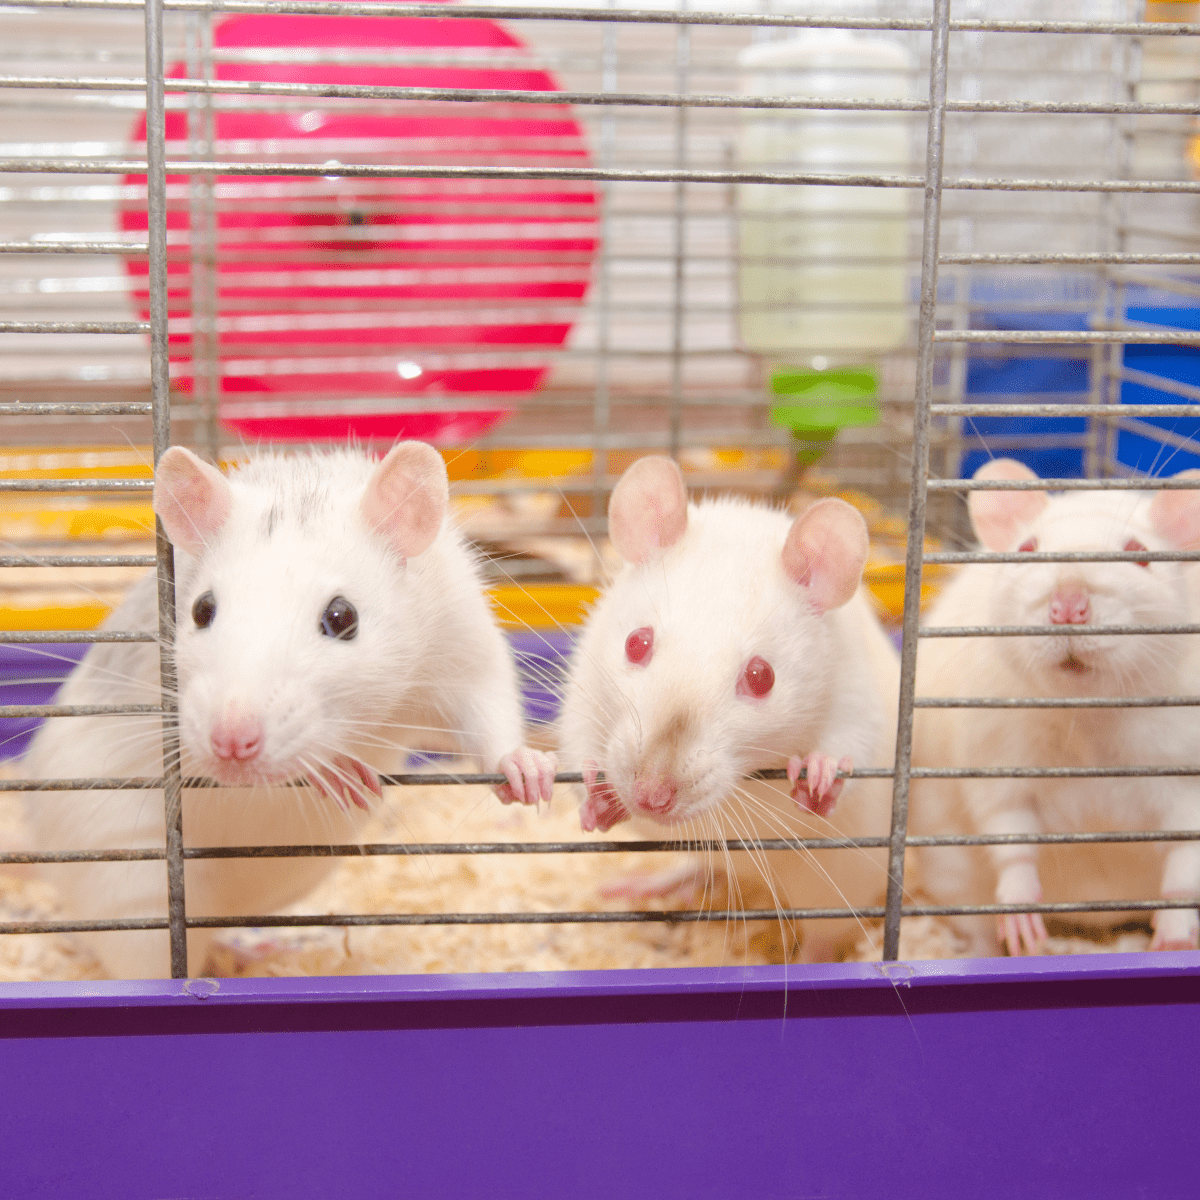 What cages are best for mice? 